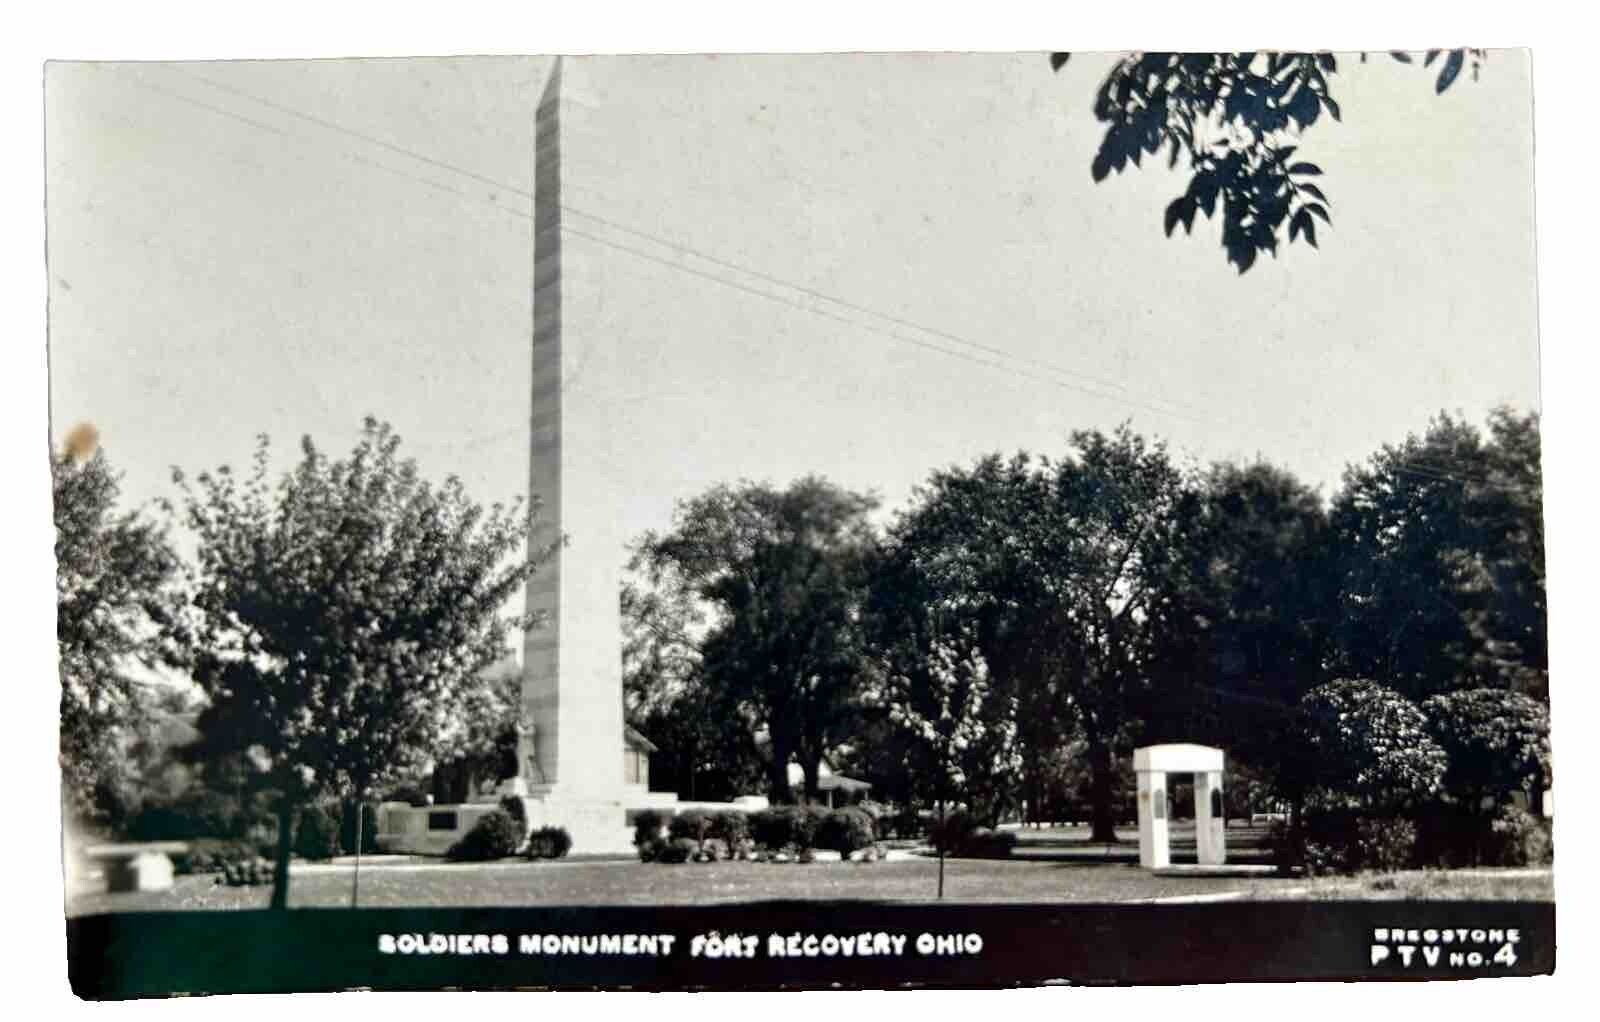 SOLDIERS MONUMENT FORT RECOVERY OHIO Vintage Real Photo Postcard. RPPC